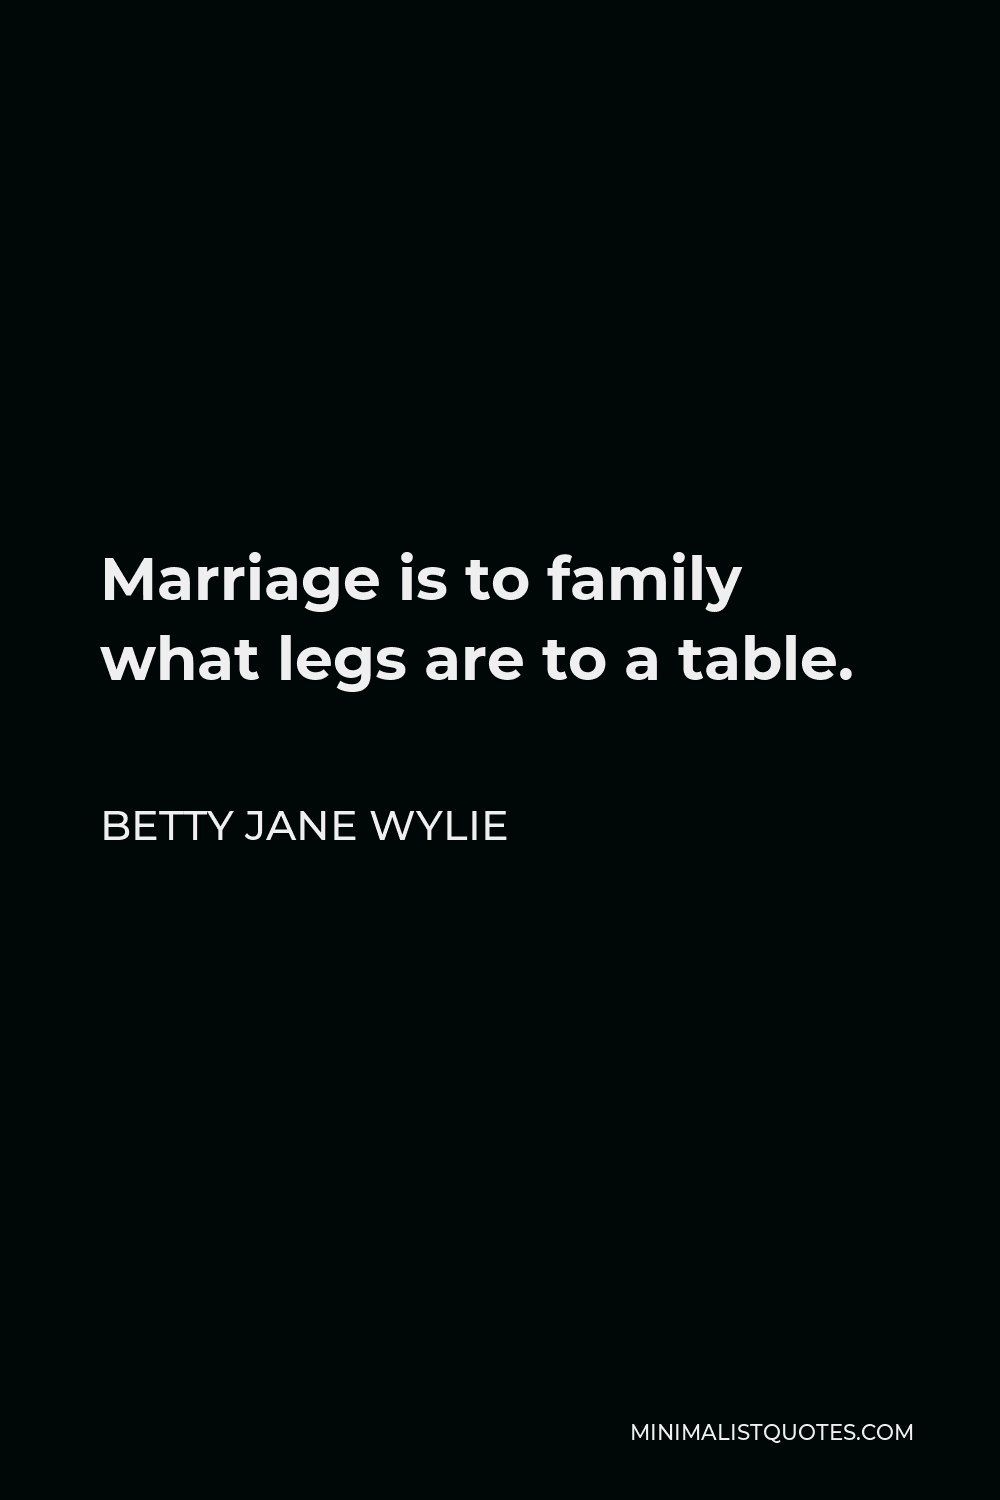 Betty Jane Wylie Quote - Marriage is to family what legs are to a table.